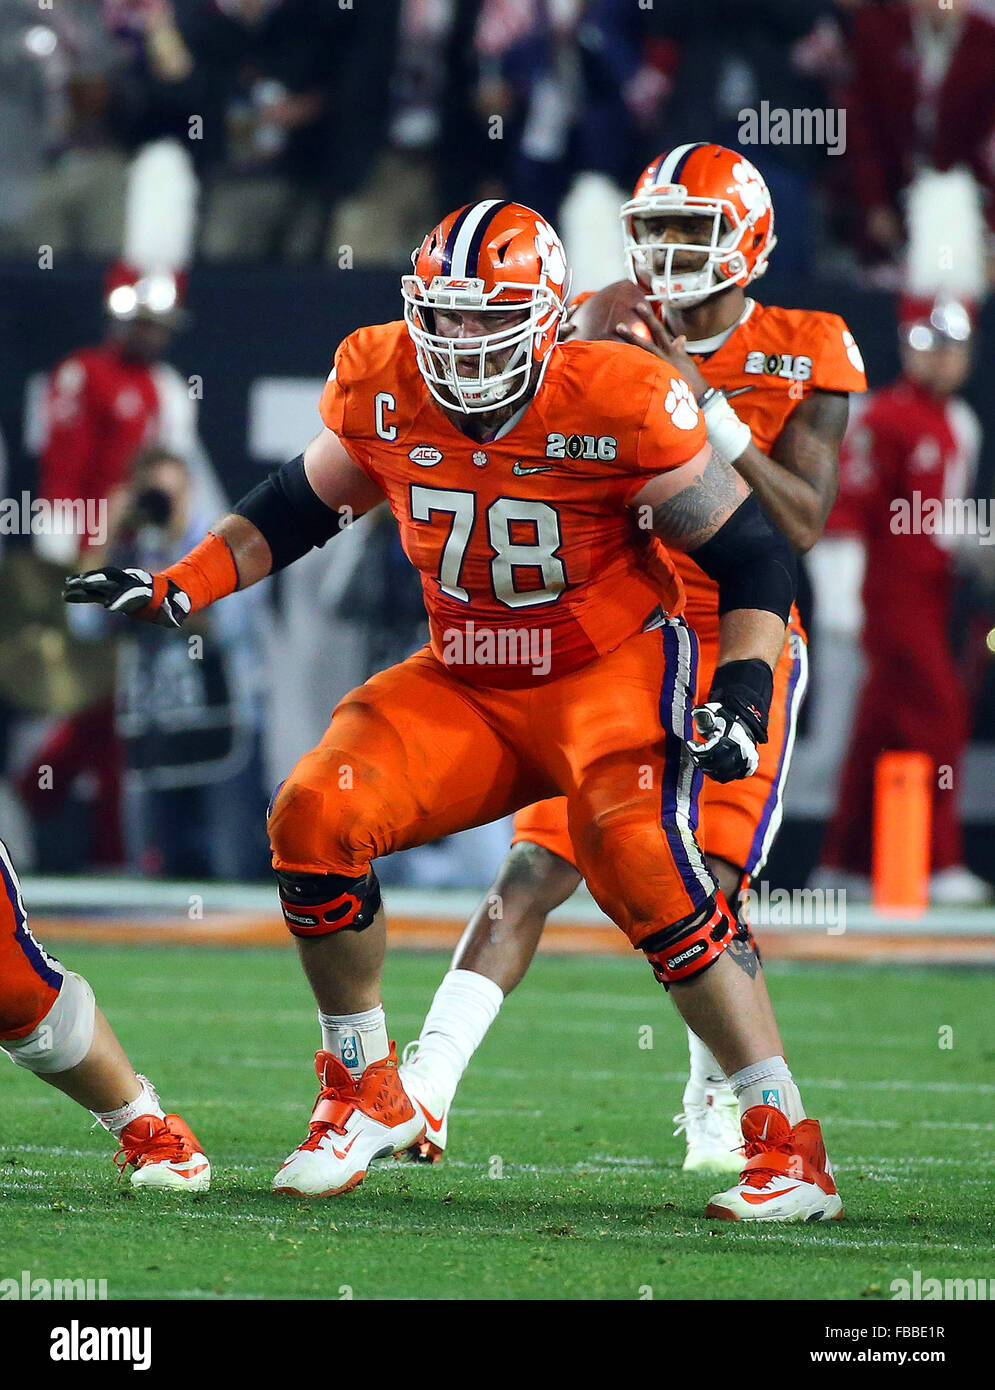 January 11, 2016Eric Mac Lain #78 of the Clemson Tigers in action during the 2016 College Football Playoff National Championship Game between the Alabama Crimson Tide and the Clemson Tigers at the University of Phoenix Stadium in Glendale, Arizona. The Crimson Tide defeated the Tigers with a score of 45 to 40. Charles Baus/CSM Stock Photo